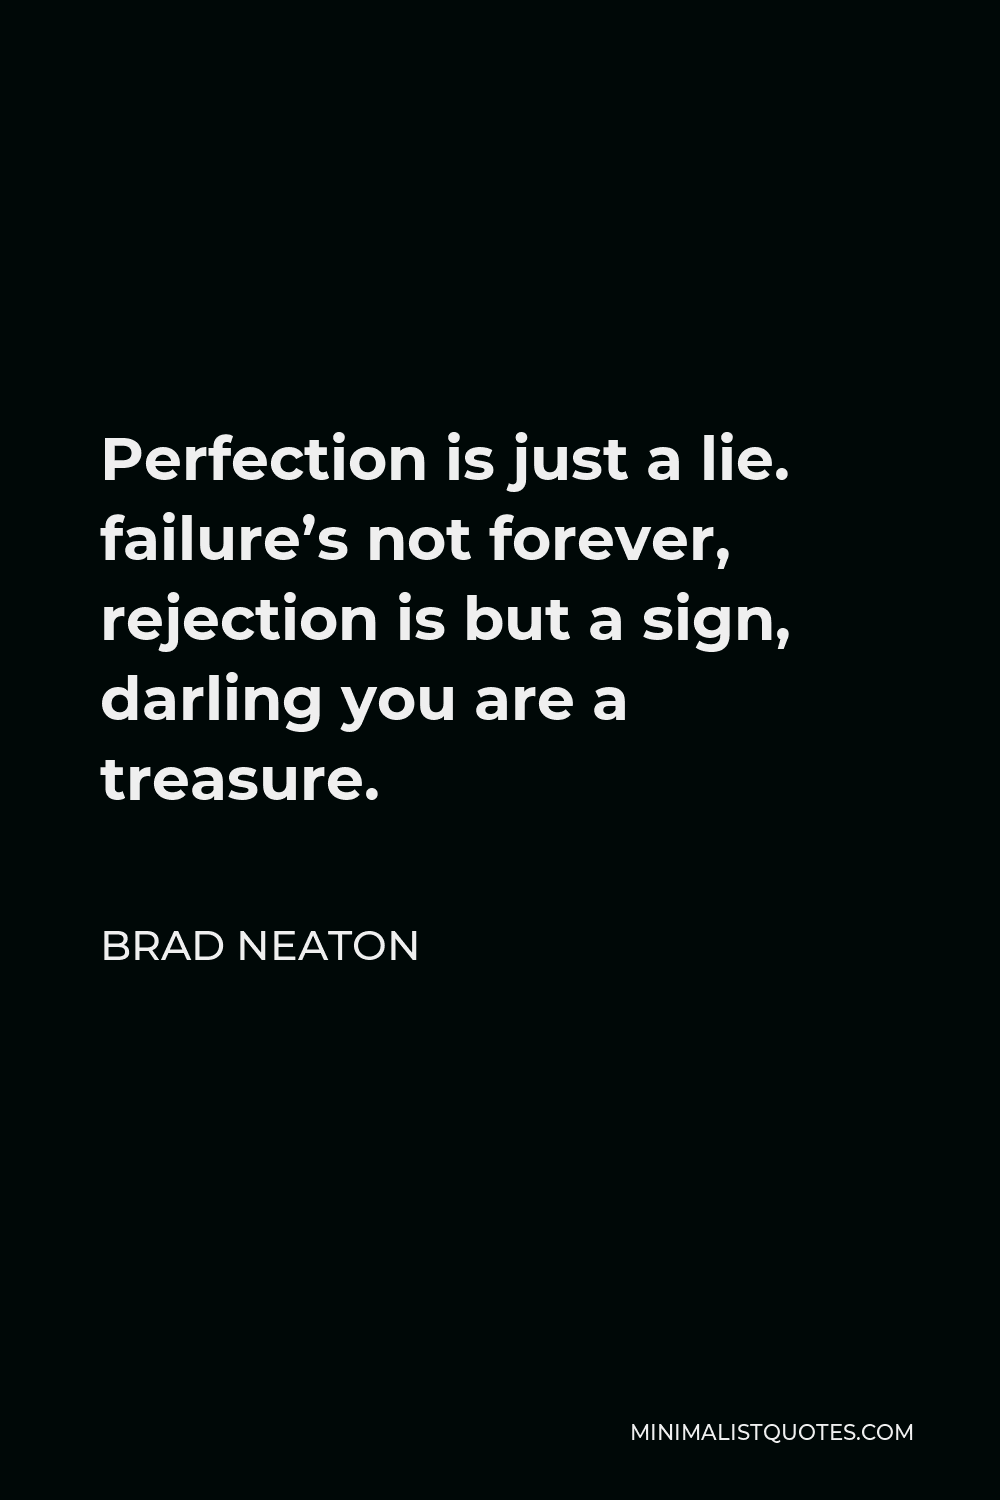 Brad Neaton Quote - Perfection is just a lie. failure’s not forever, rejection is but a sign, darling you are a treasure.